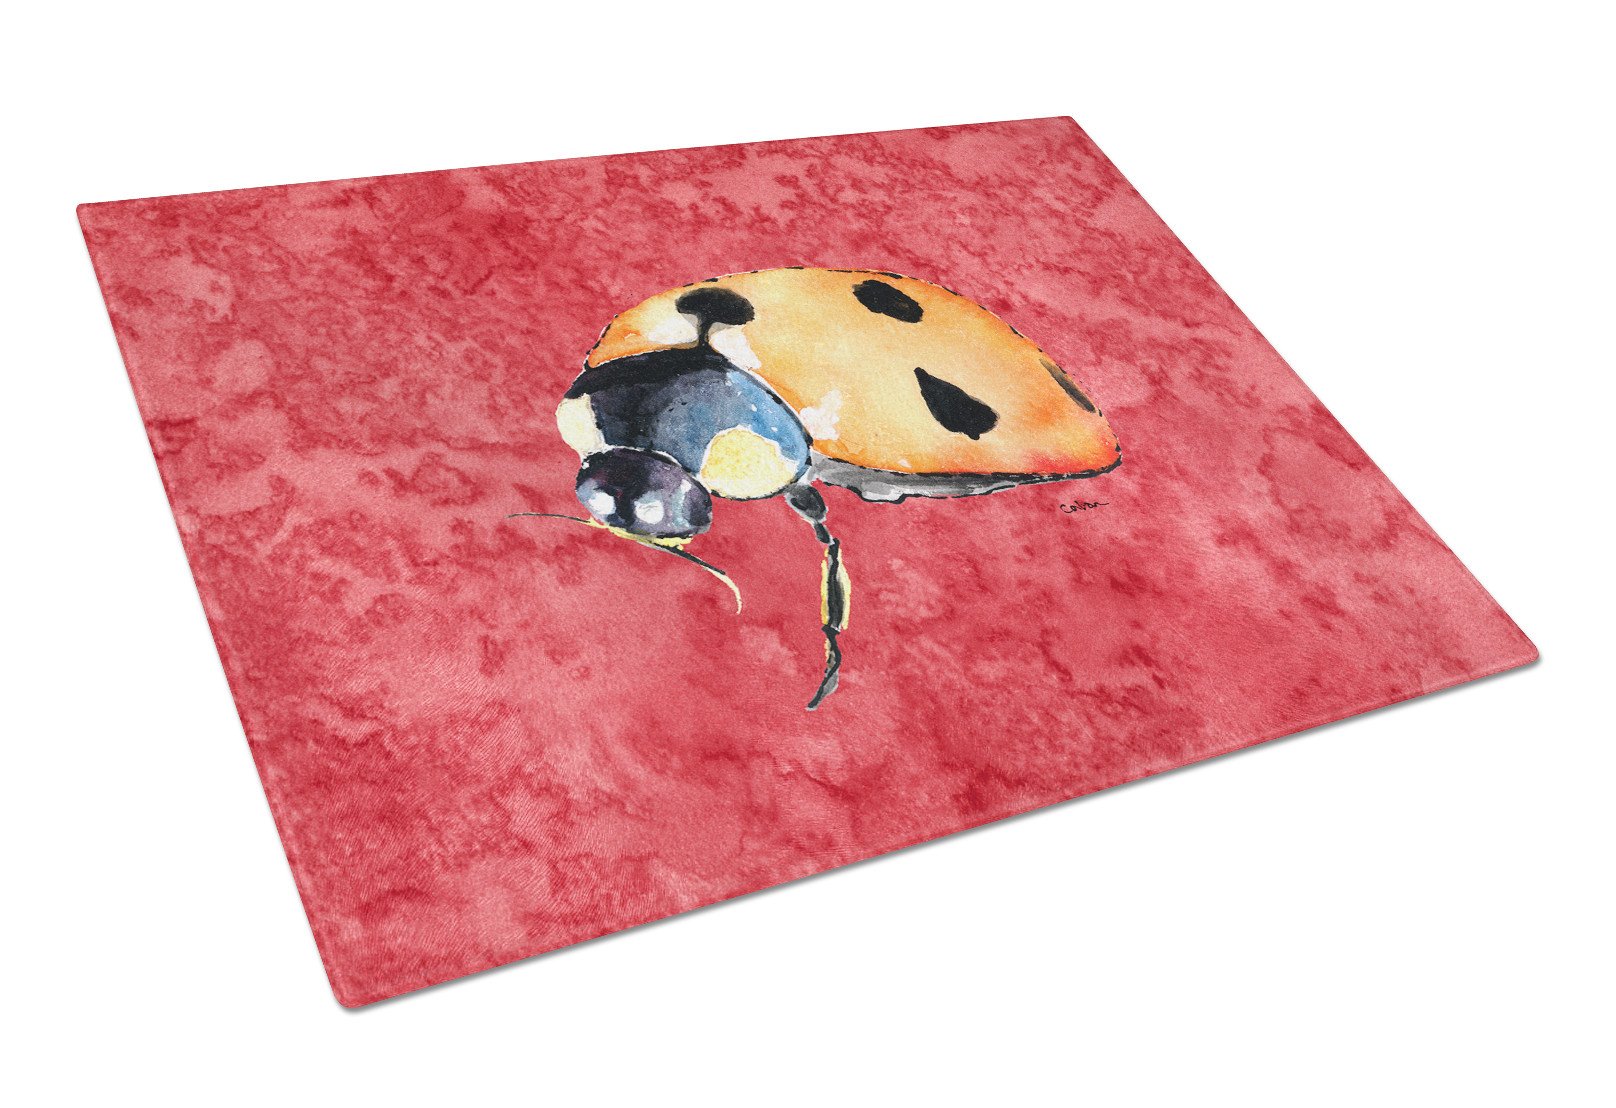 Lady Bug on Red Glass Cutting Board Large by Caroline's Treasures